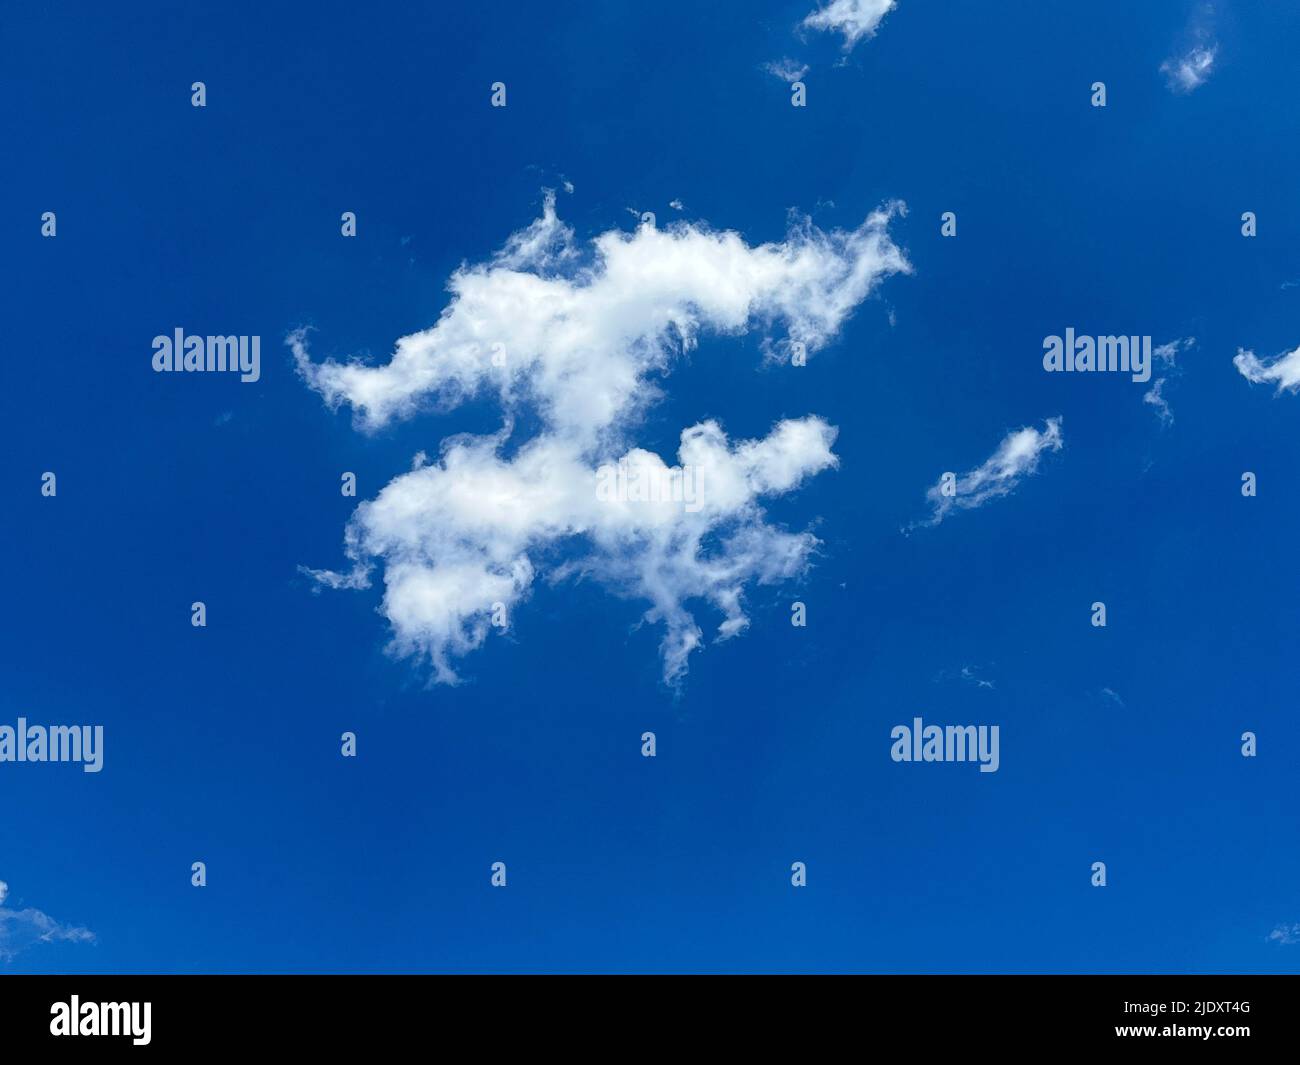 Cloud animals in tghe blue sky. Stock Photo